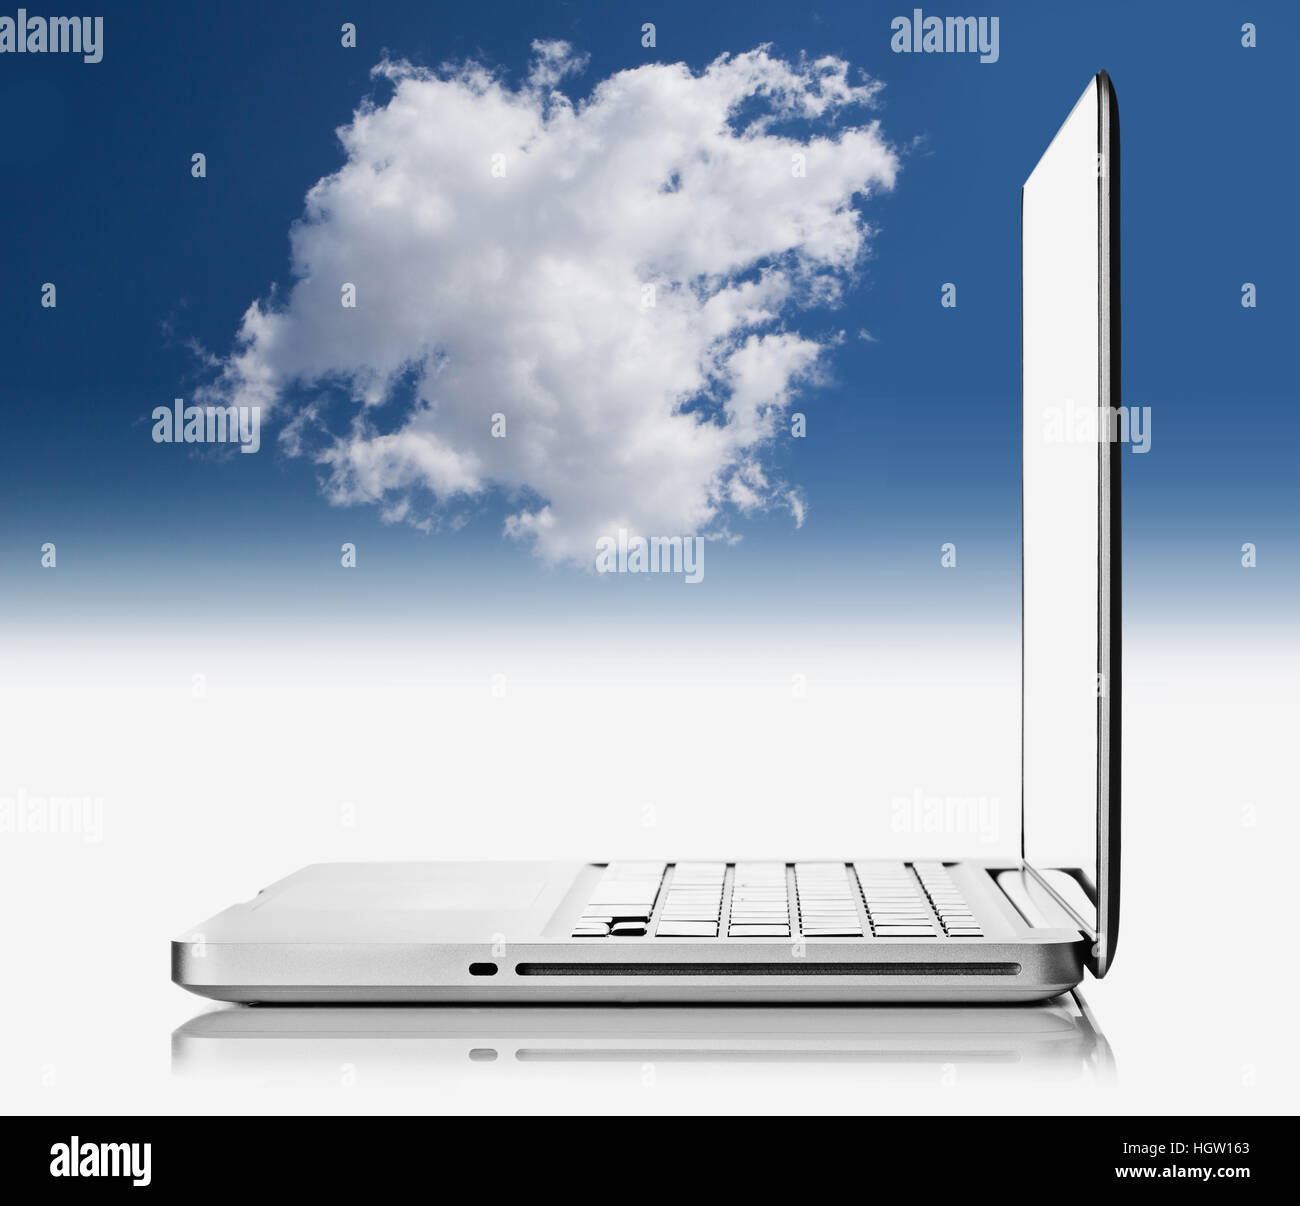 Composite Of A Digital Tablet With Clouds Stock Photo